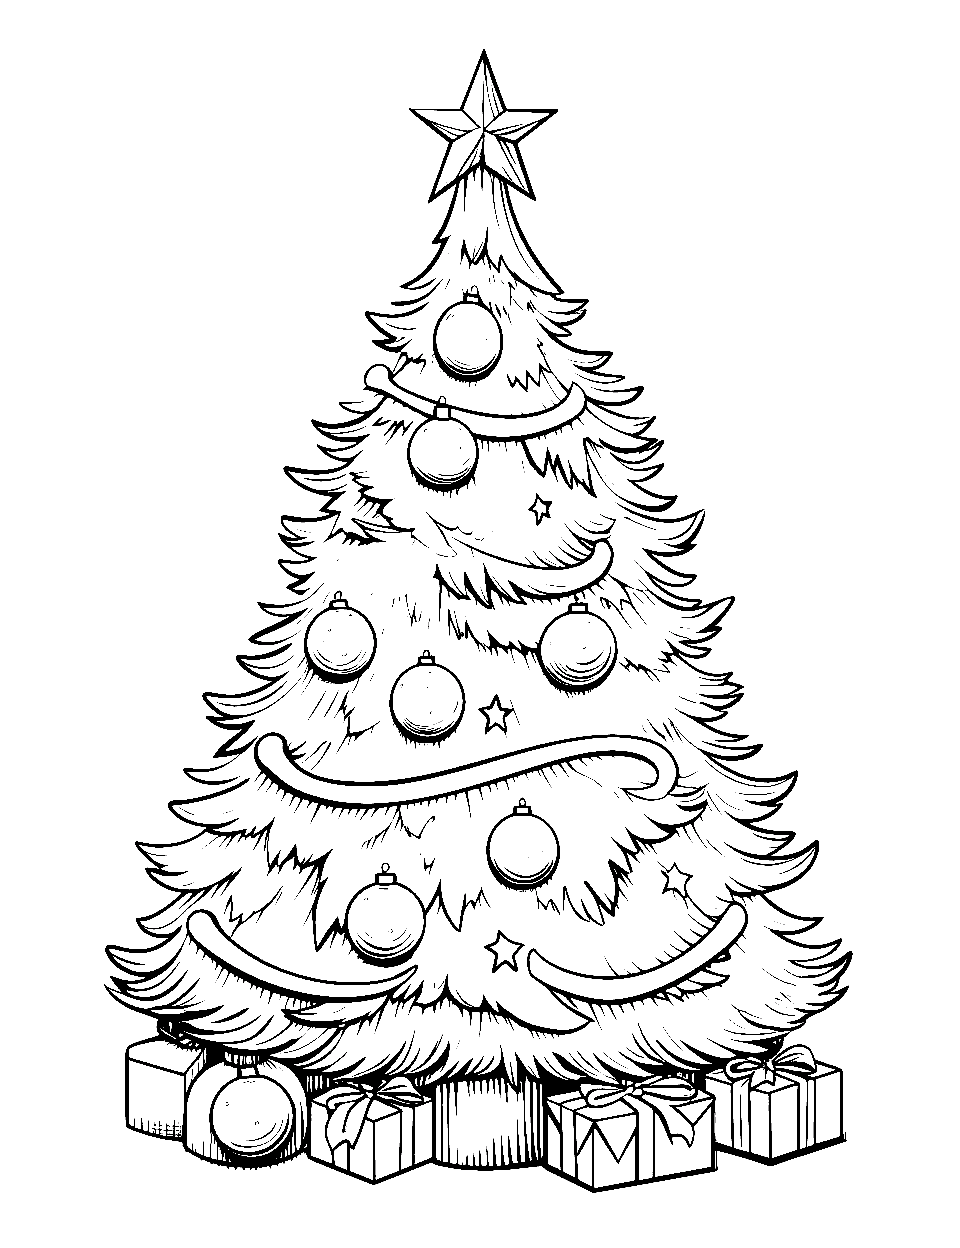 7 Free Christmas Coloring Pages - Grandma Ideas | Printable christmas  coloring pages, Free christmas coloring pages, Christmas ornament coloring  page